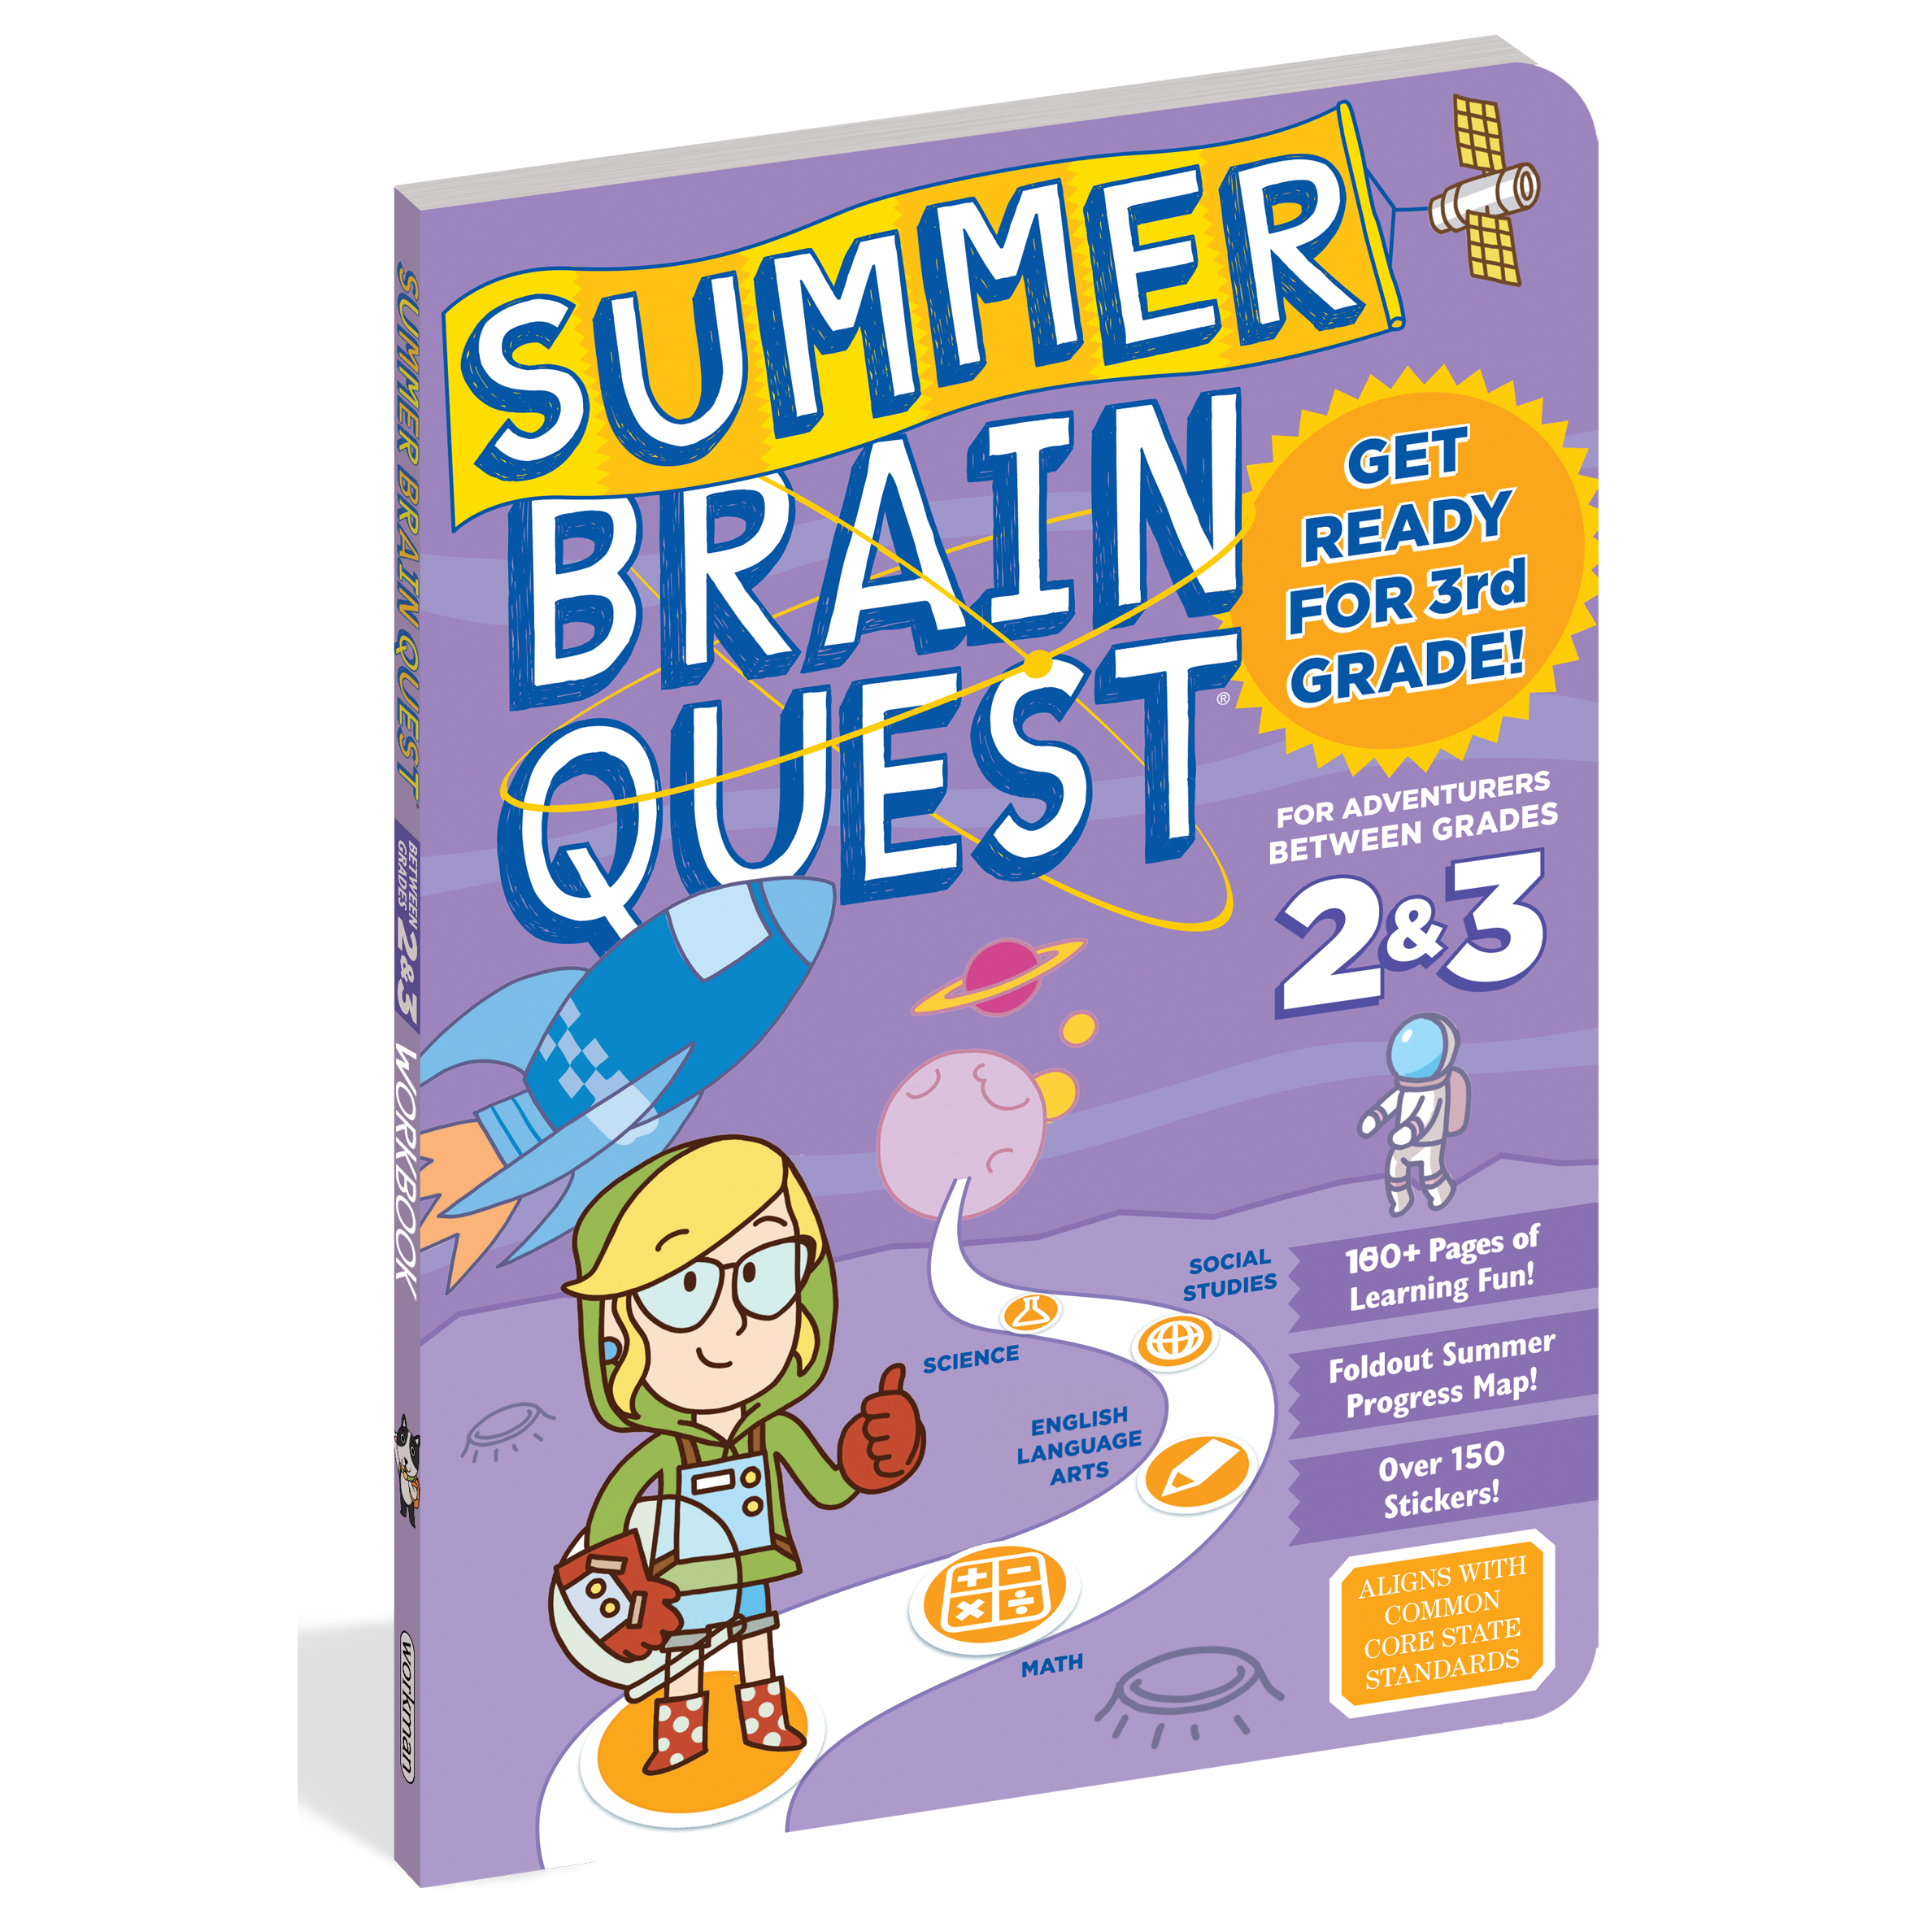 Summer BrainQuest Get ready for 3rd Grade! 1